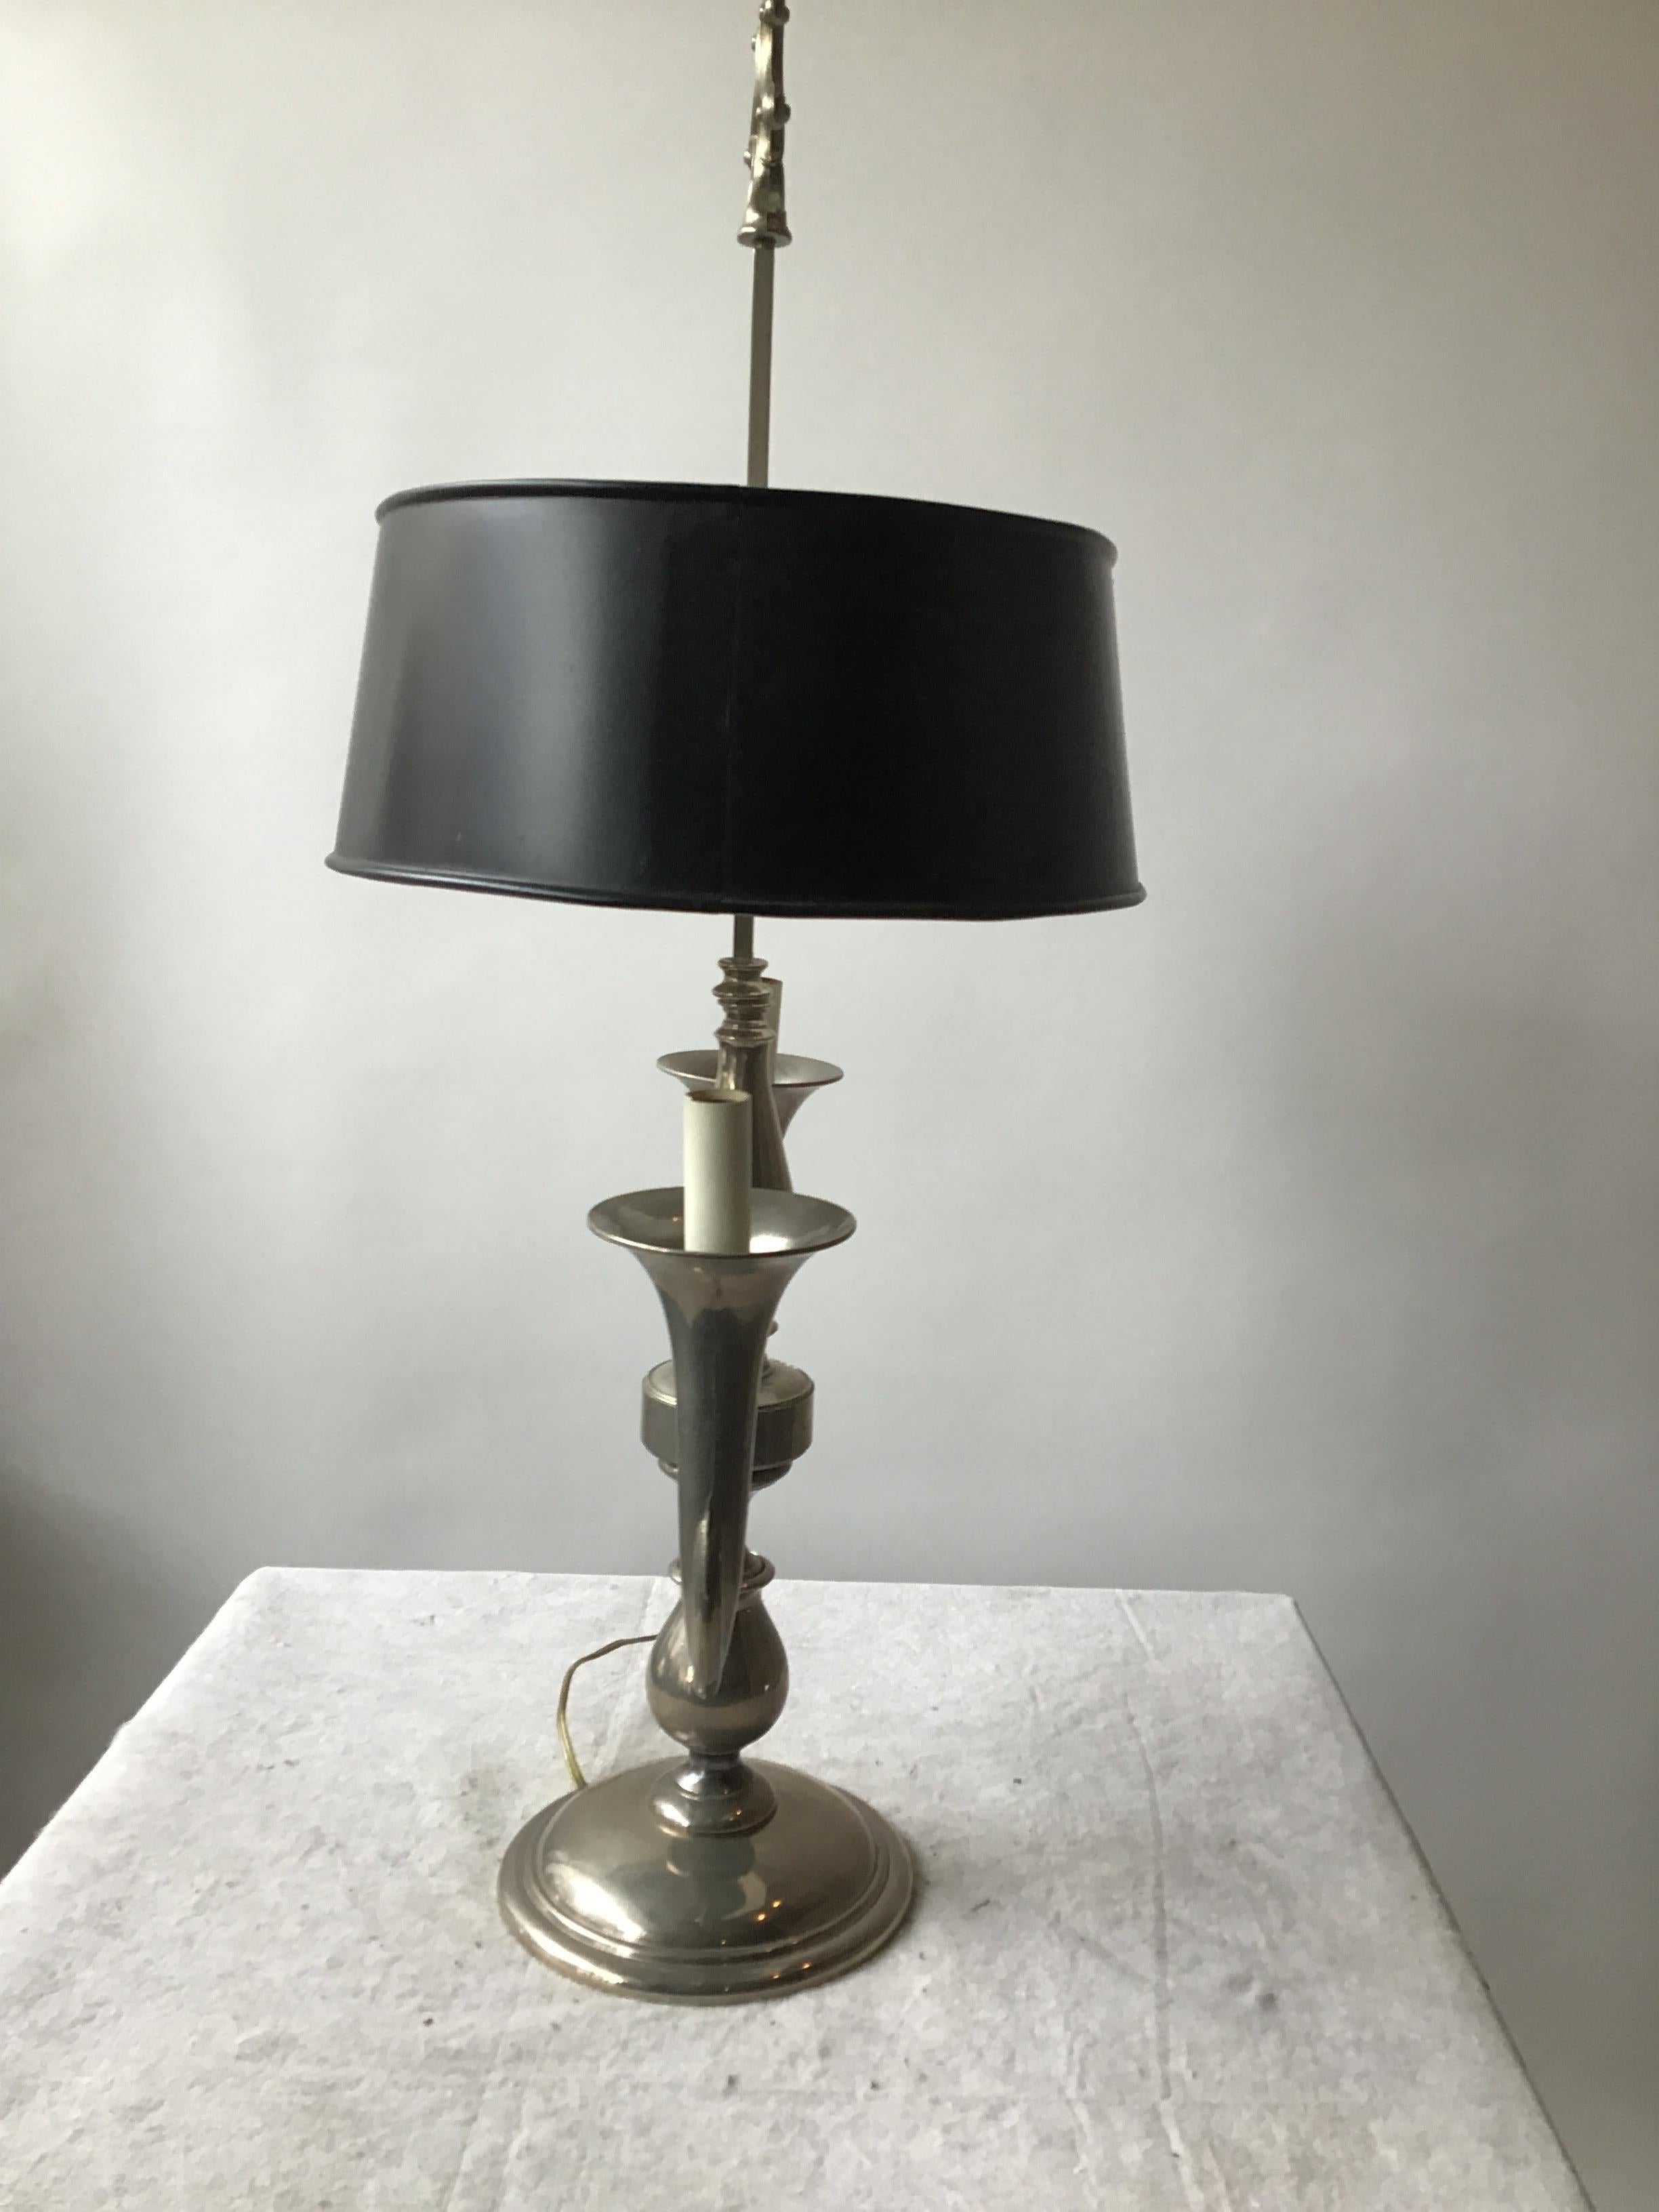 1970s Pewter Trumpet Lamp With Adjustable Tole Shade In Good Condition For Sale In Tarrytown, NY